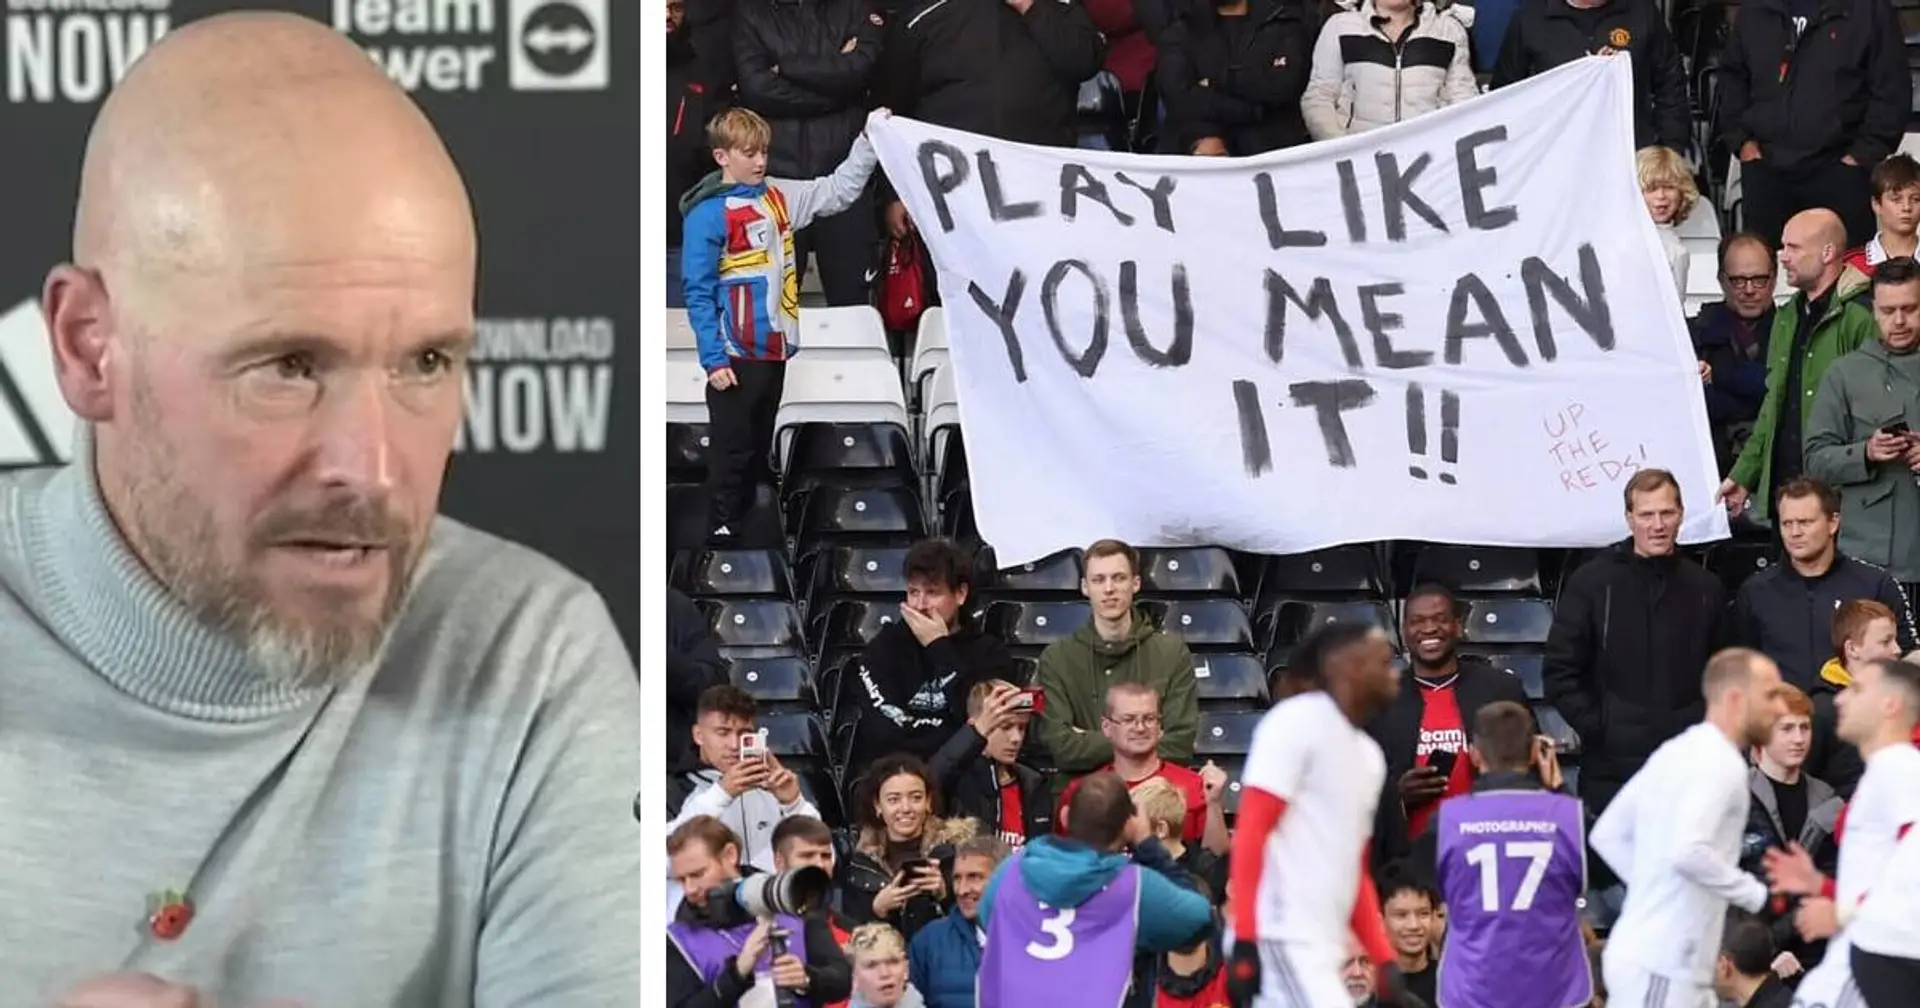 Erik ten Hag on 'Play Like You Mean It' banner: 'Players can put more effort in winning'